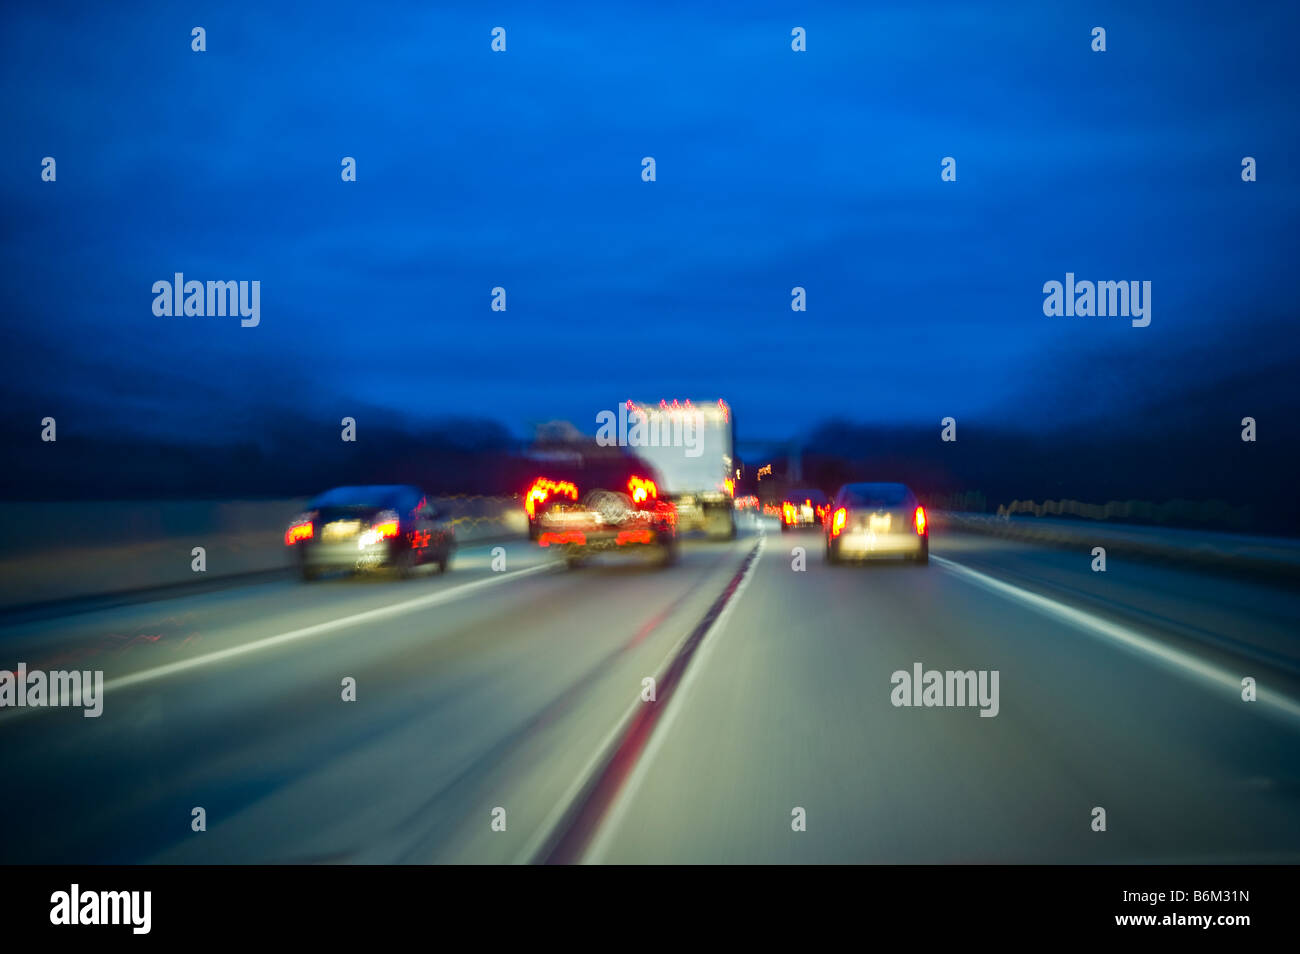 Cars On Highway At Night With Motion Blur Stock Photo